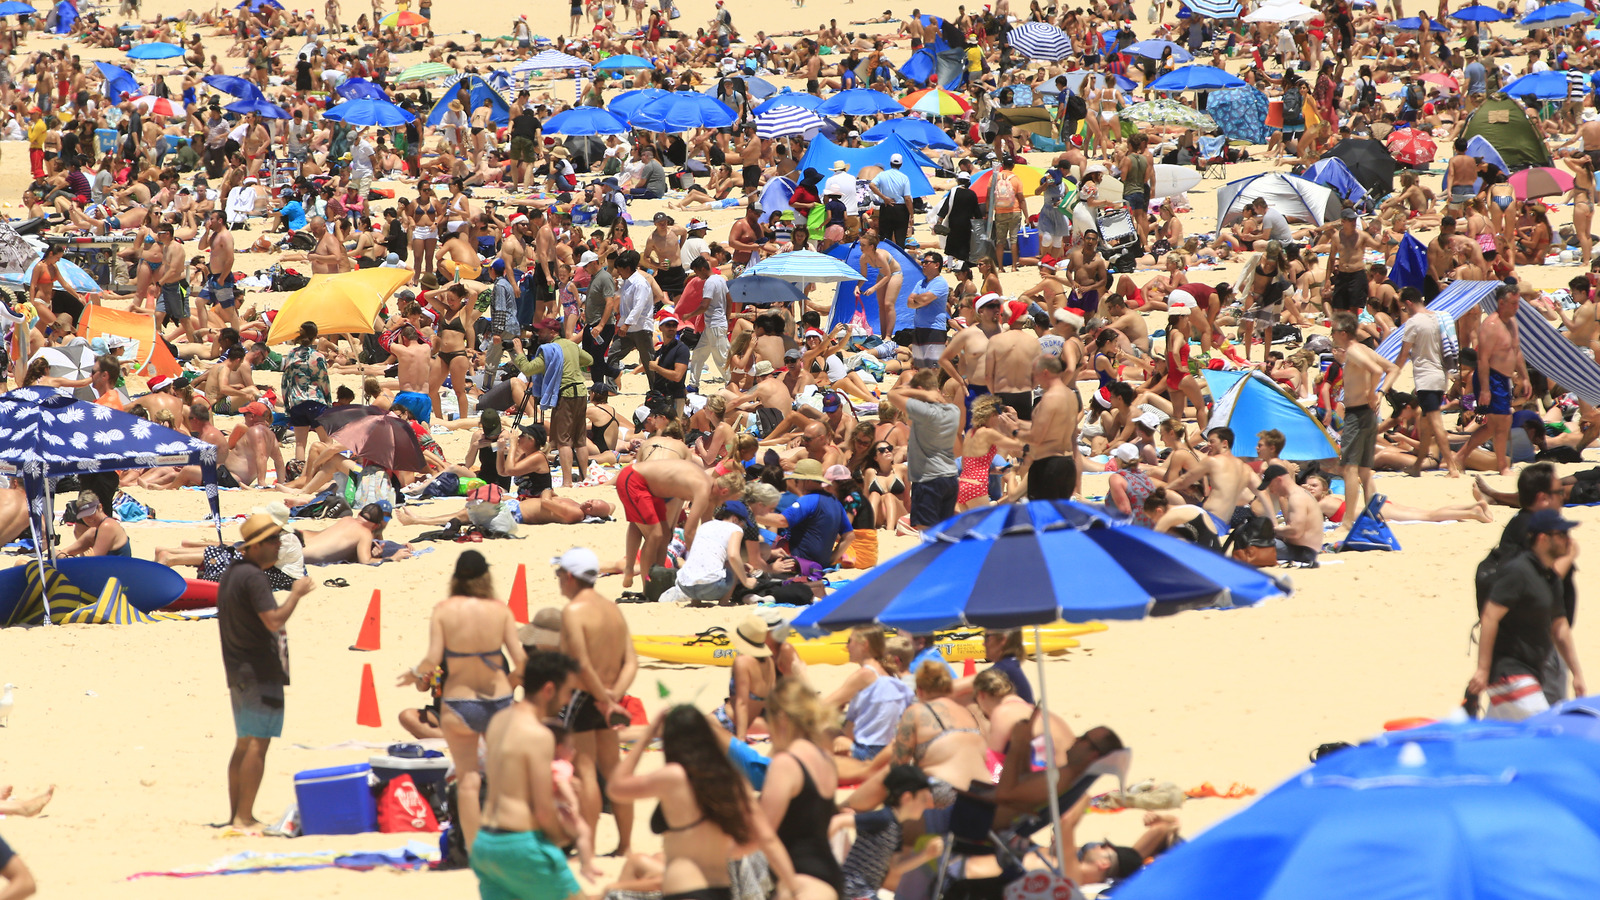 The Trick To Finding A More Private Spot On A Crowded Beach